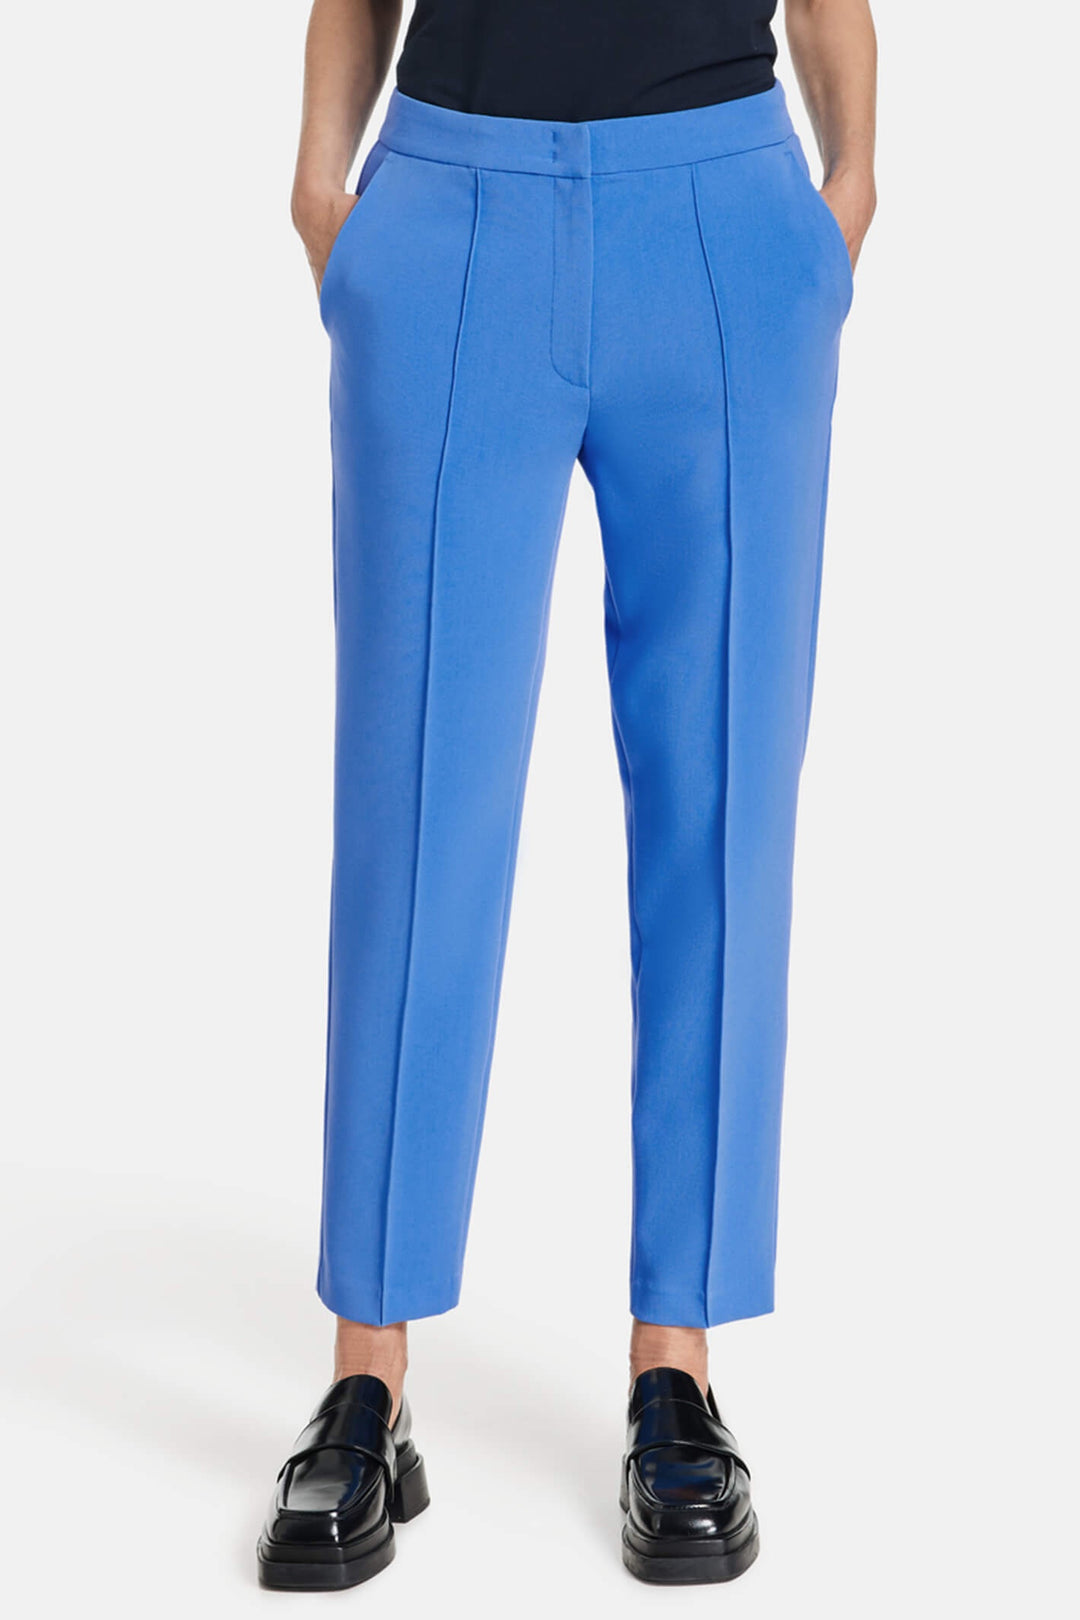 Gerry Weber 220011-31340 Bright Blue Ankle Grazer Trousers - Dotique Chesterfield